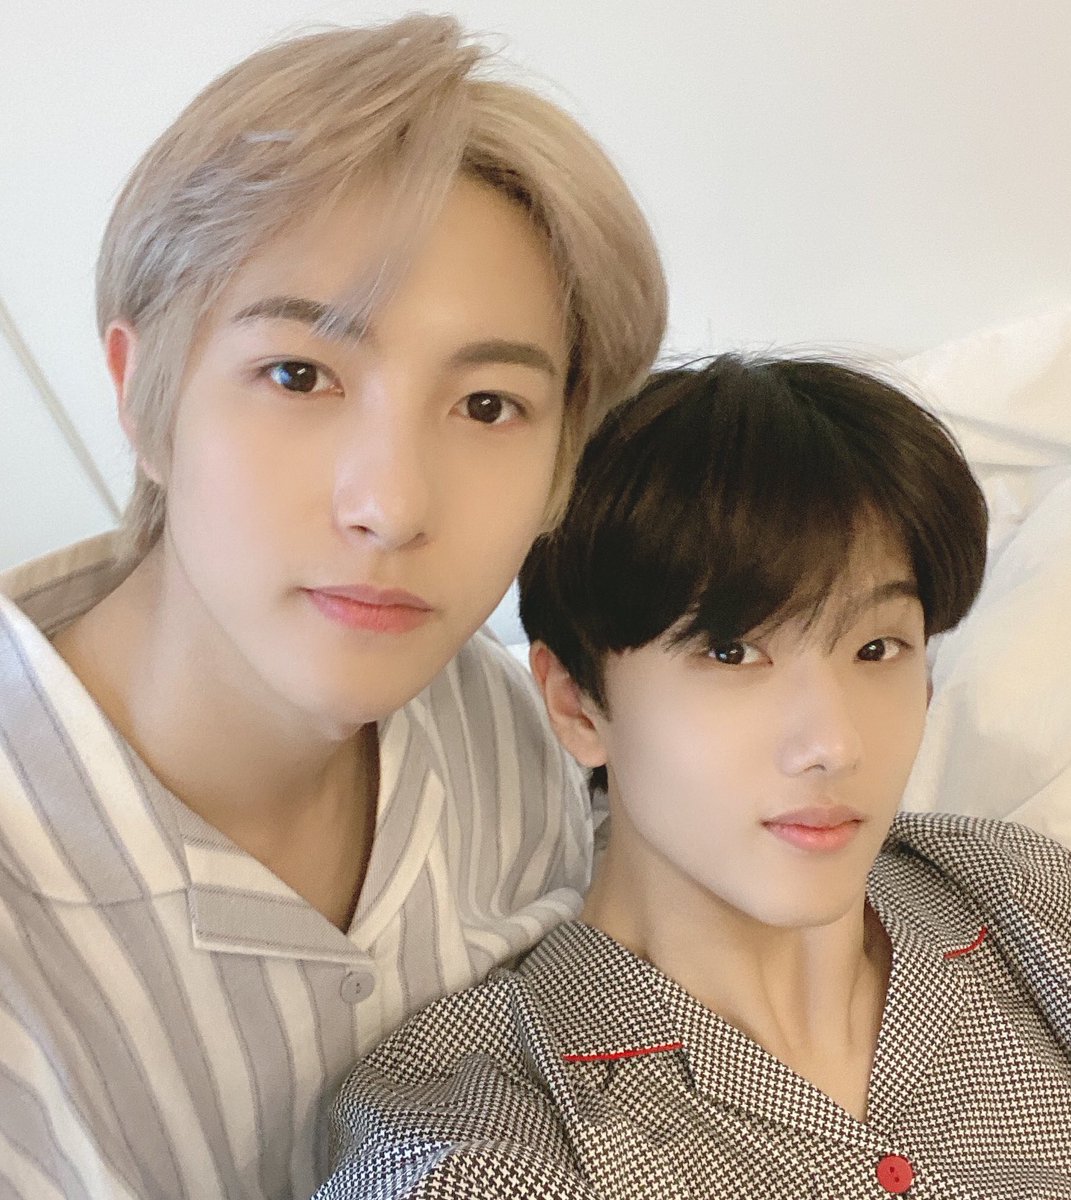 jisung is the younger brother renjun never had: a thread